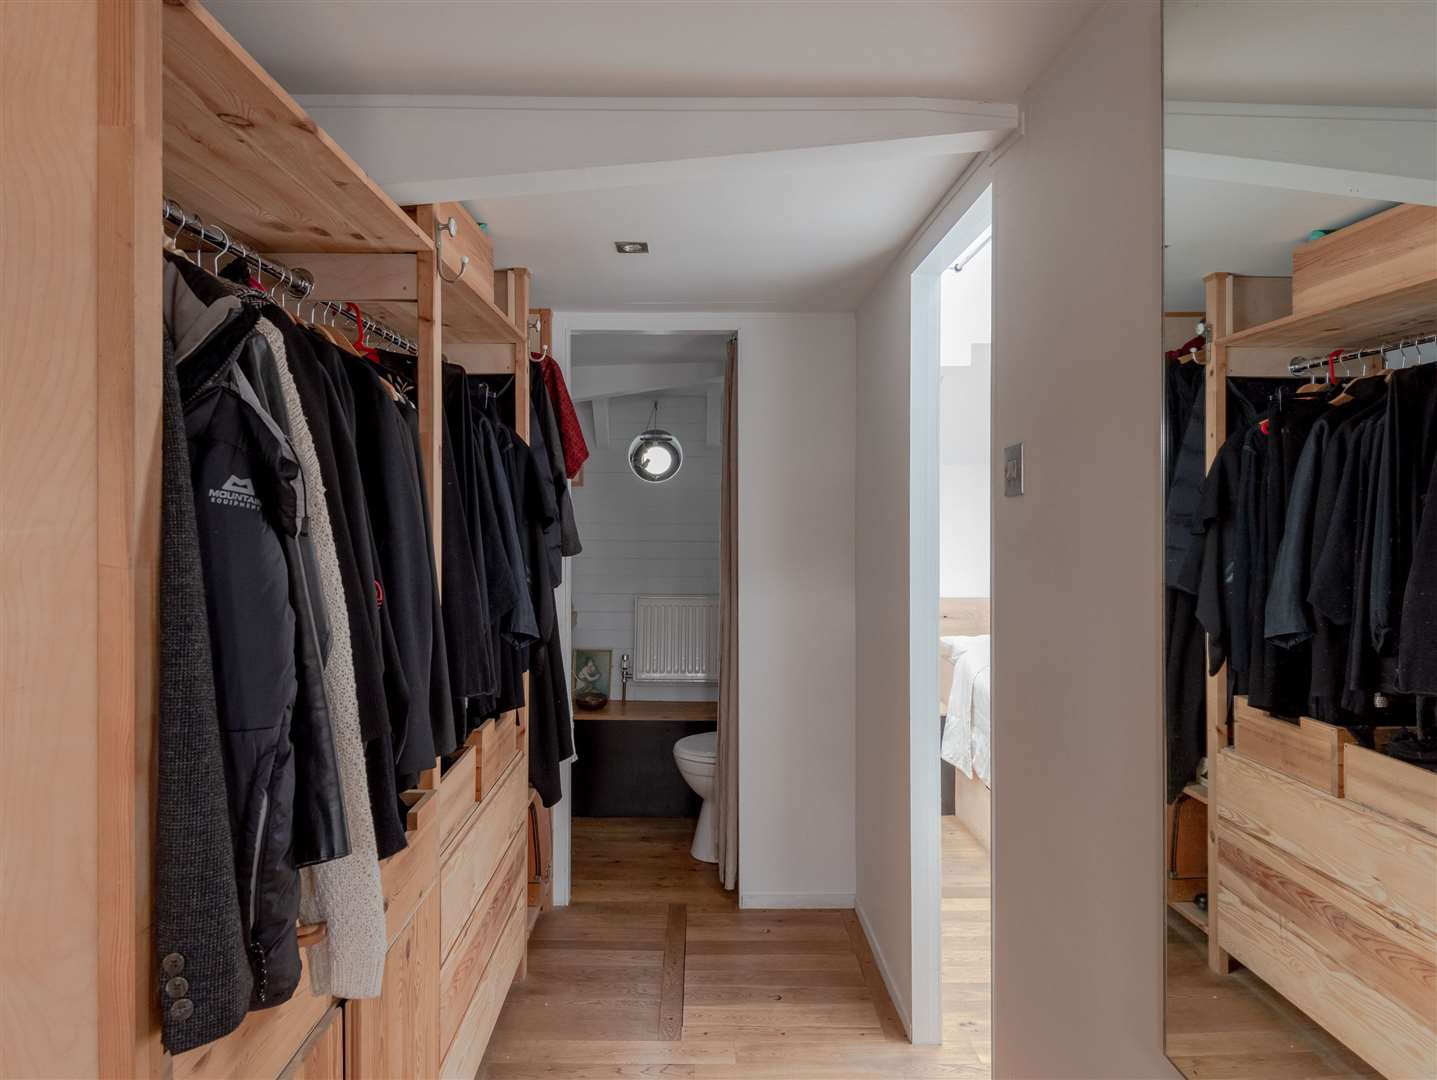 There's lots of storage space. Picture: Unique Property Company